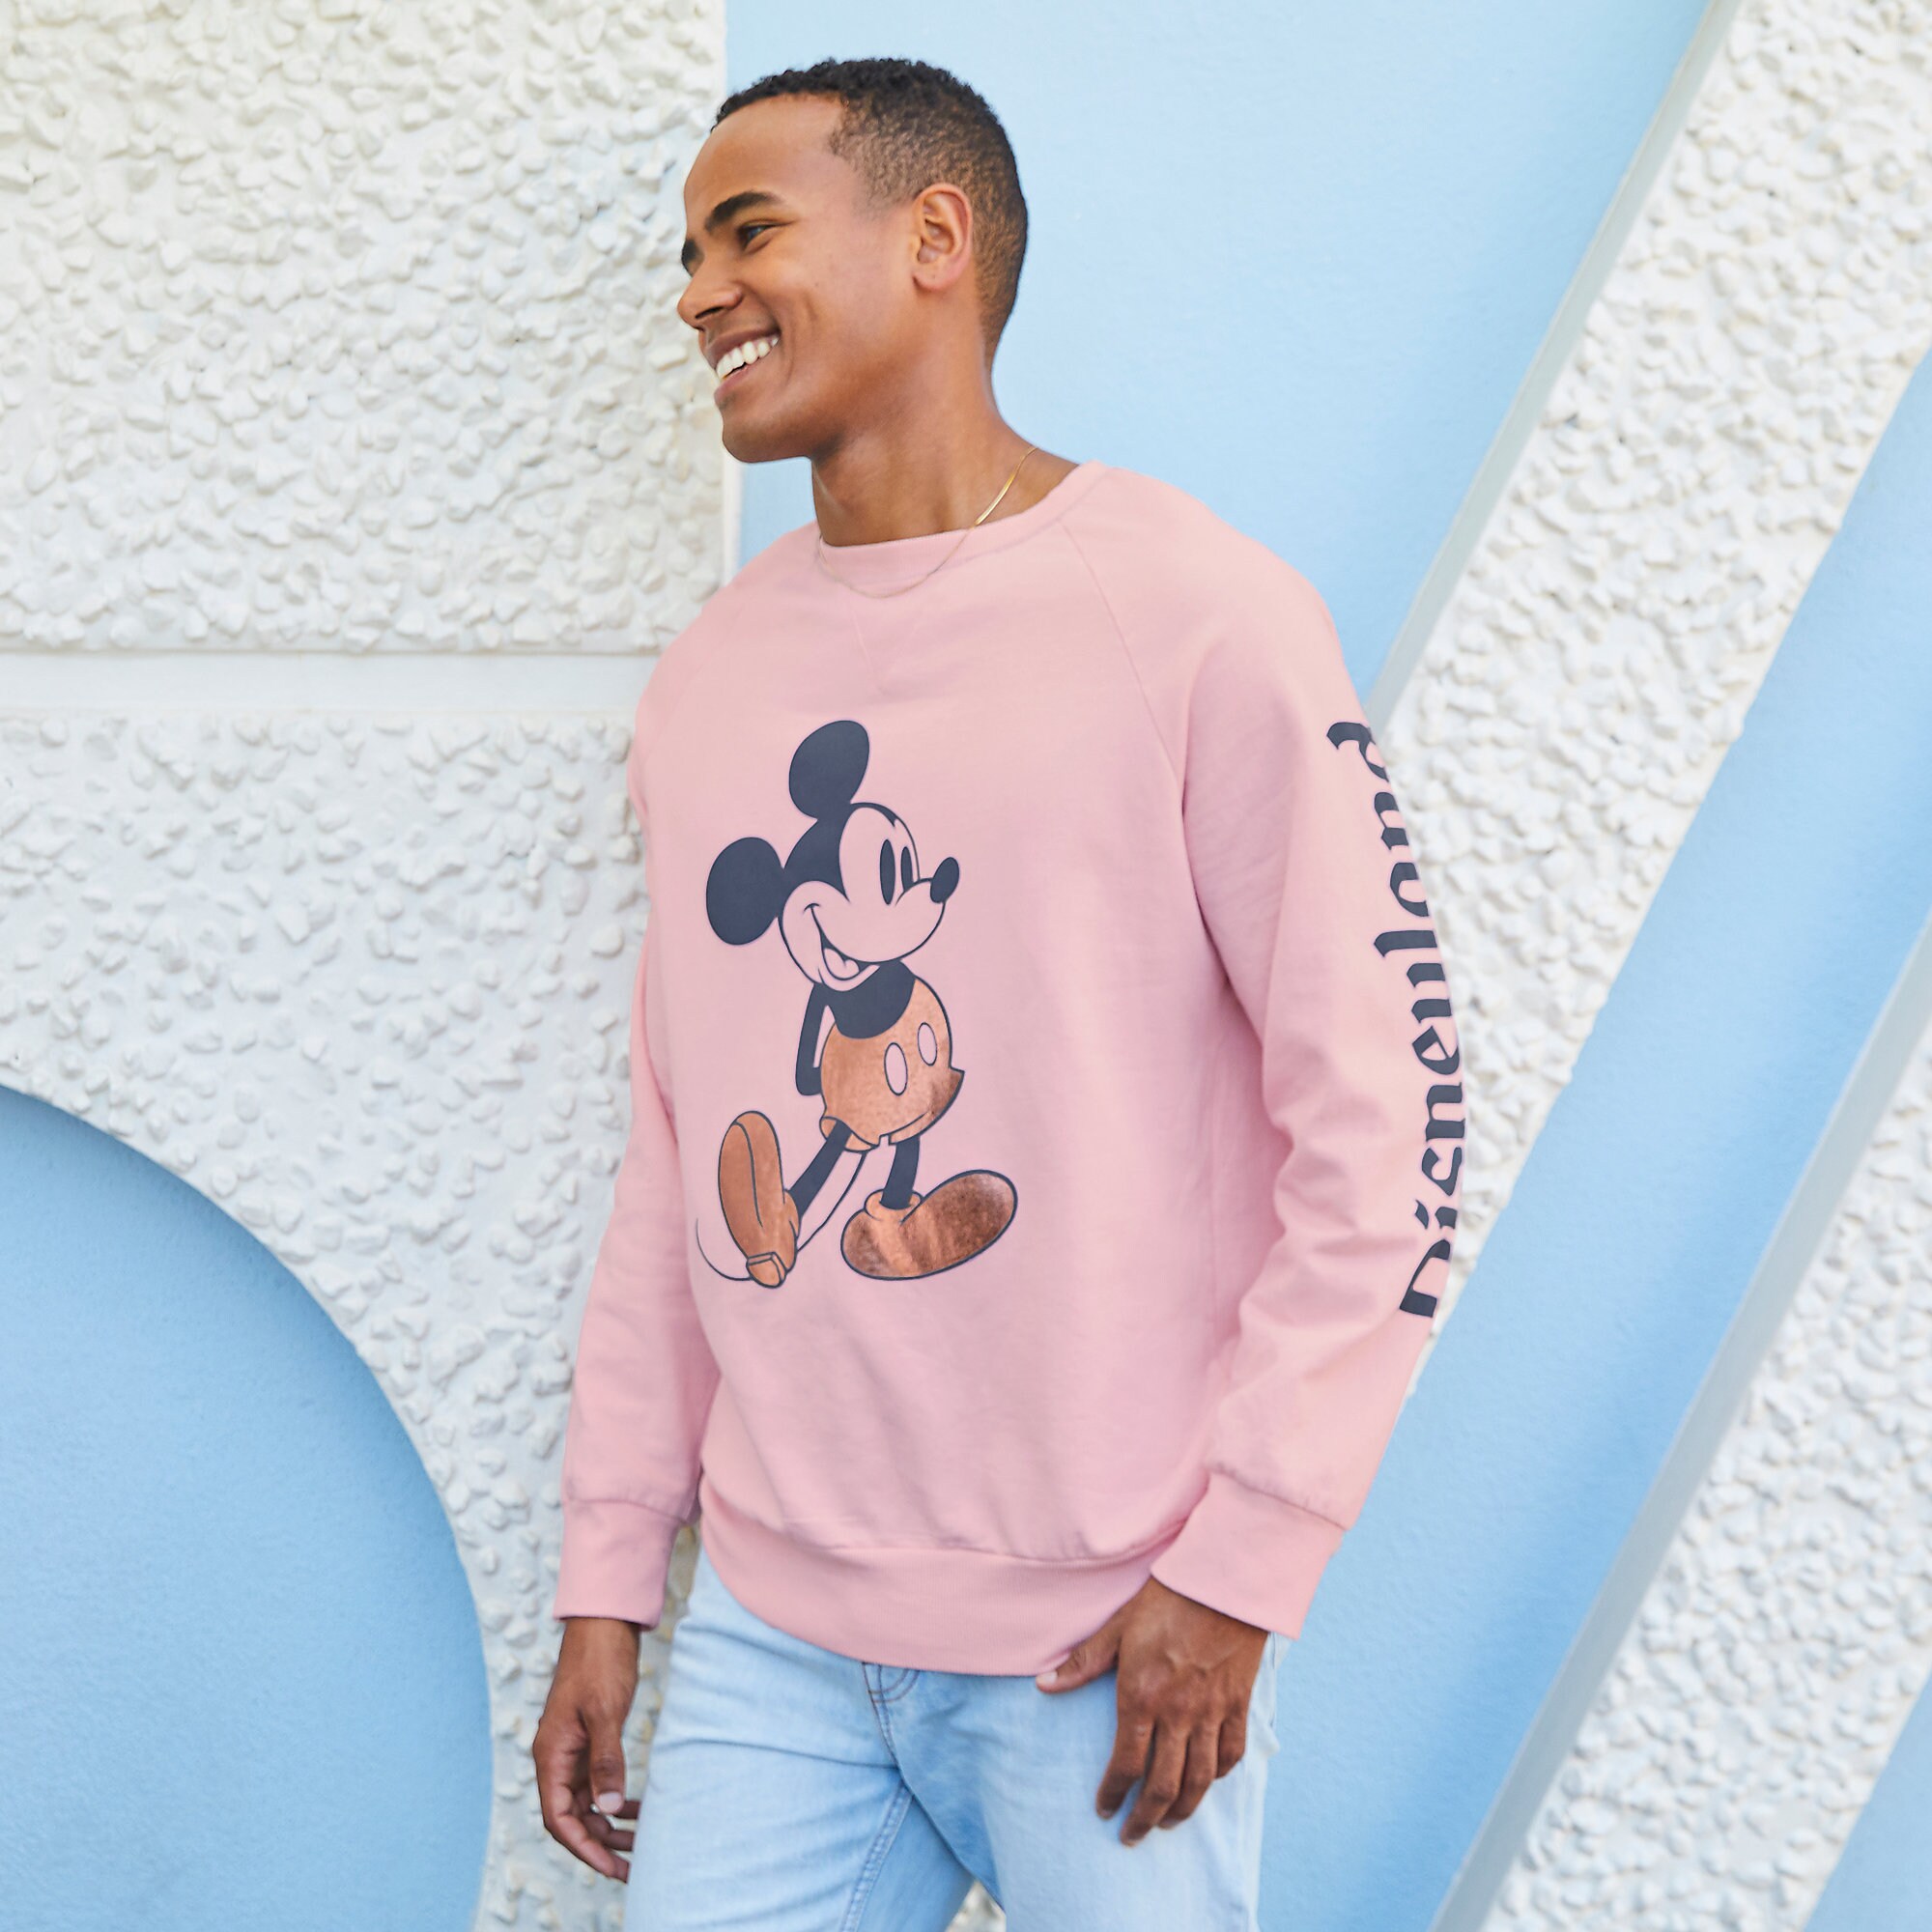 Mickey Mouse Sweatshirt for Adults - Disneyland - Briar Rose Gold